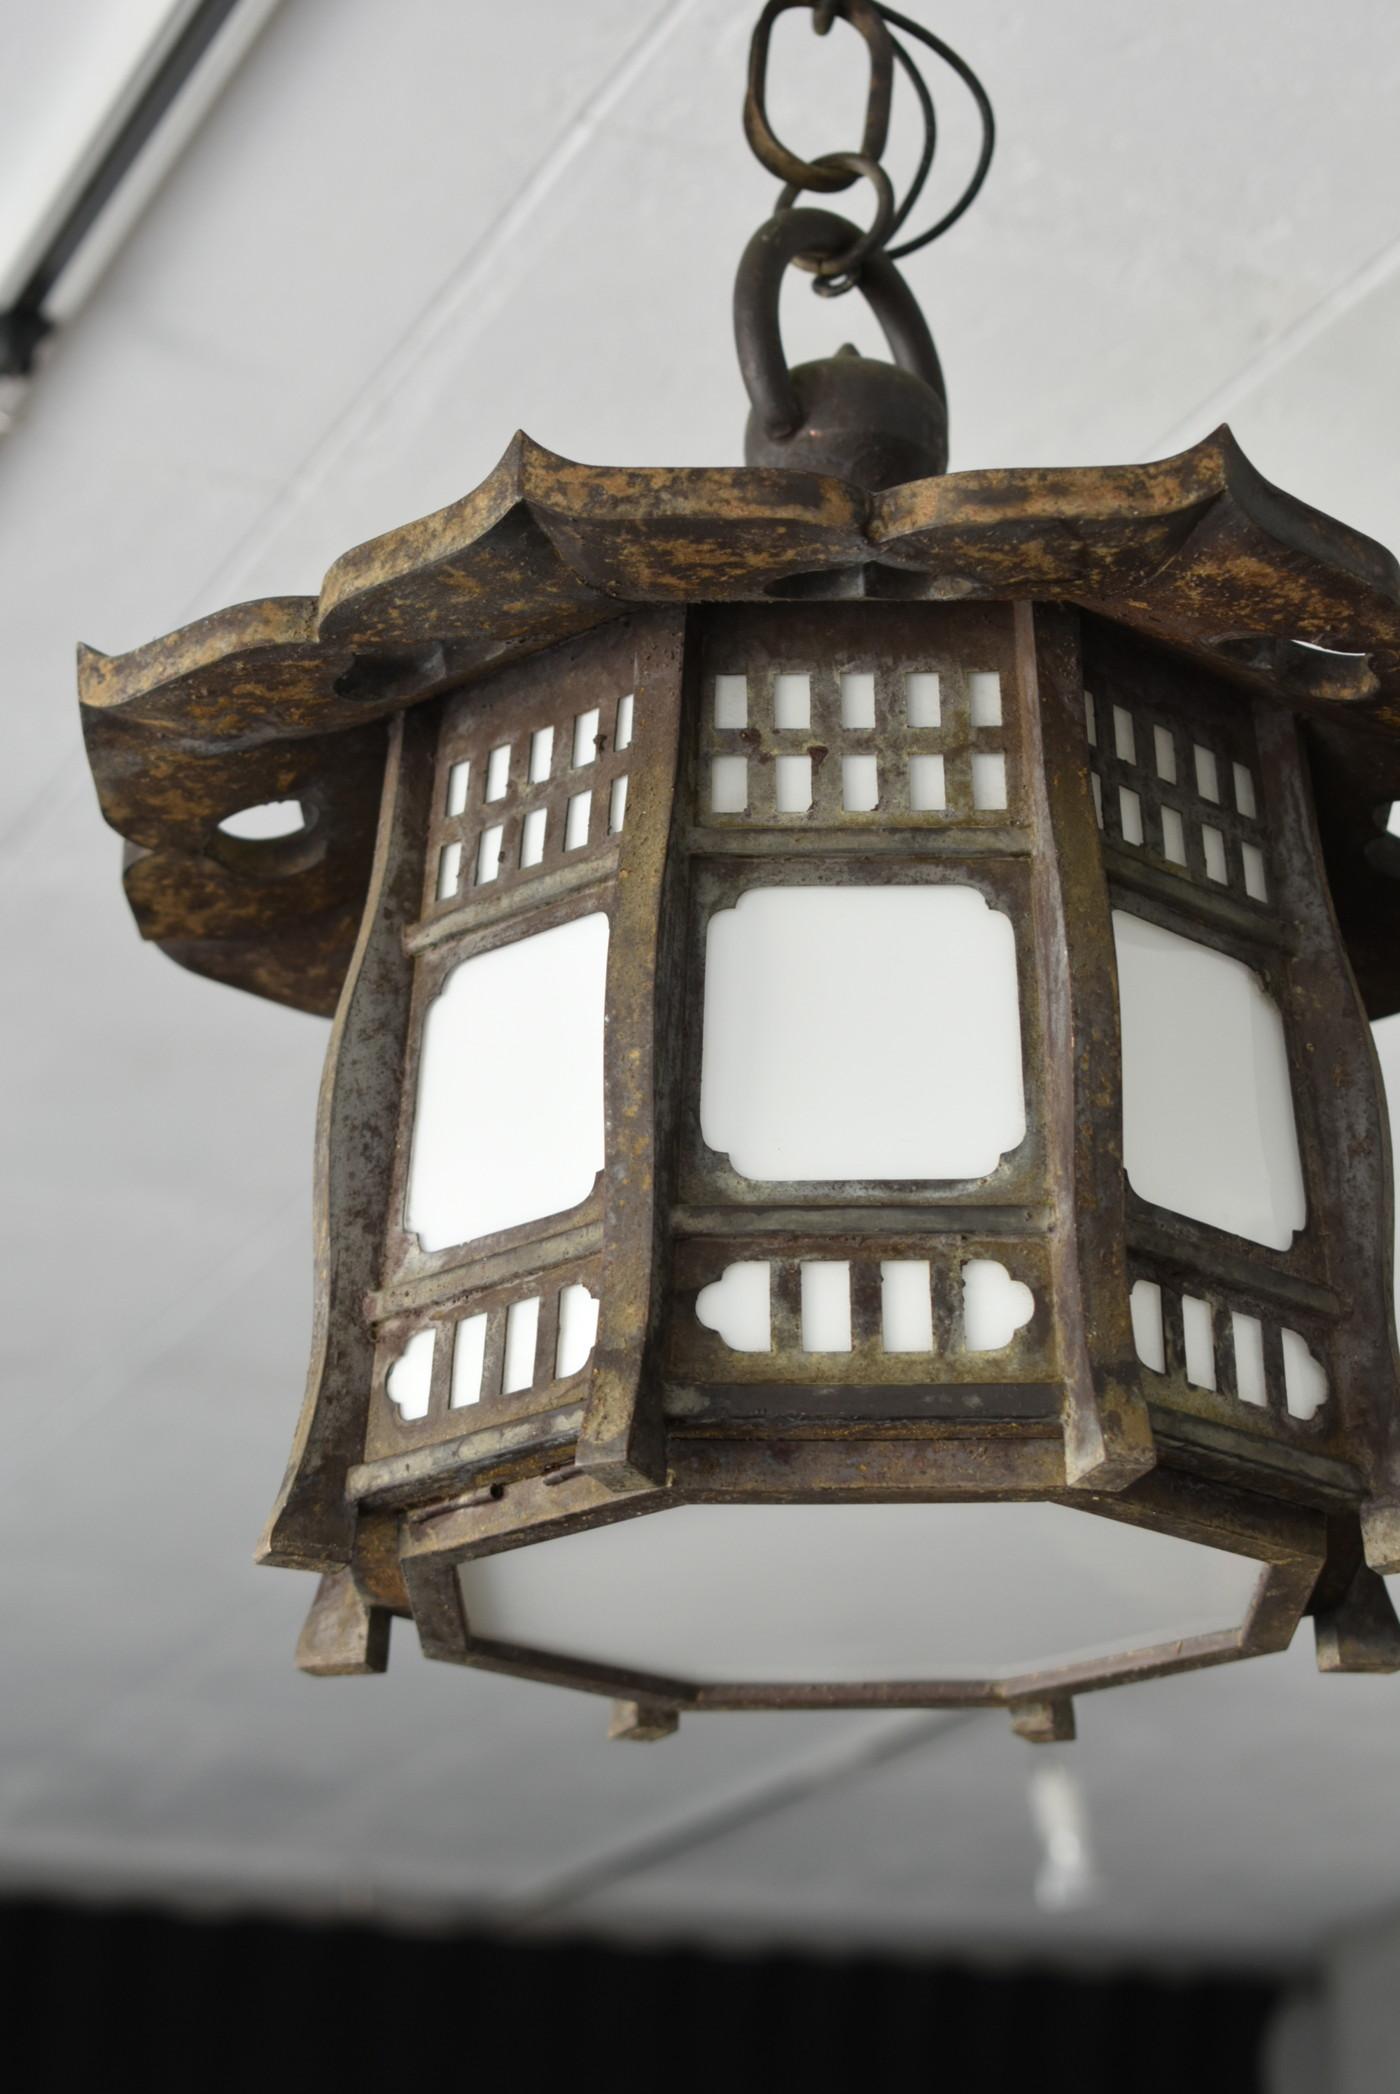 Lighting made from the Taisho era to the early Showa period in Japan.
This is an unusual shape.
The design is inspired by temple decorations.
Perhaps this was used in an inn or a wealthy house.

Material: The metal fittings are made of copper,